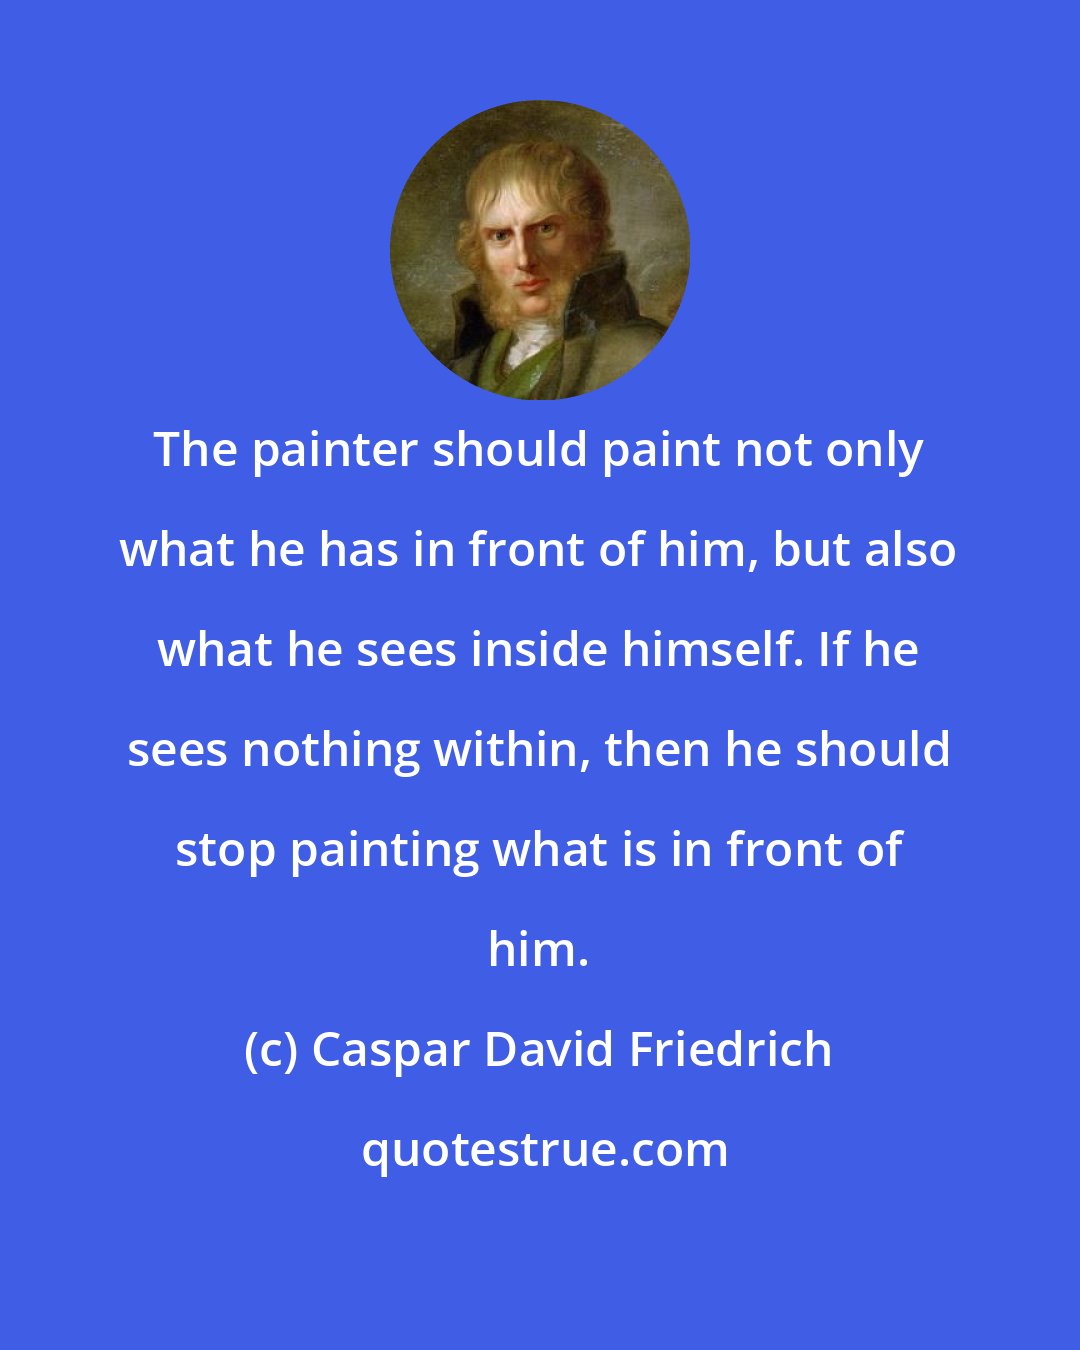 Caspar David Friedrich: The painter should paint not only what he has in front of him, but also what he sees inside himself. If he sees nothing within, then he should stop painting what is in front of him.